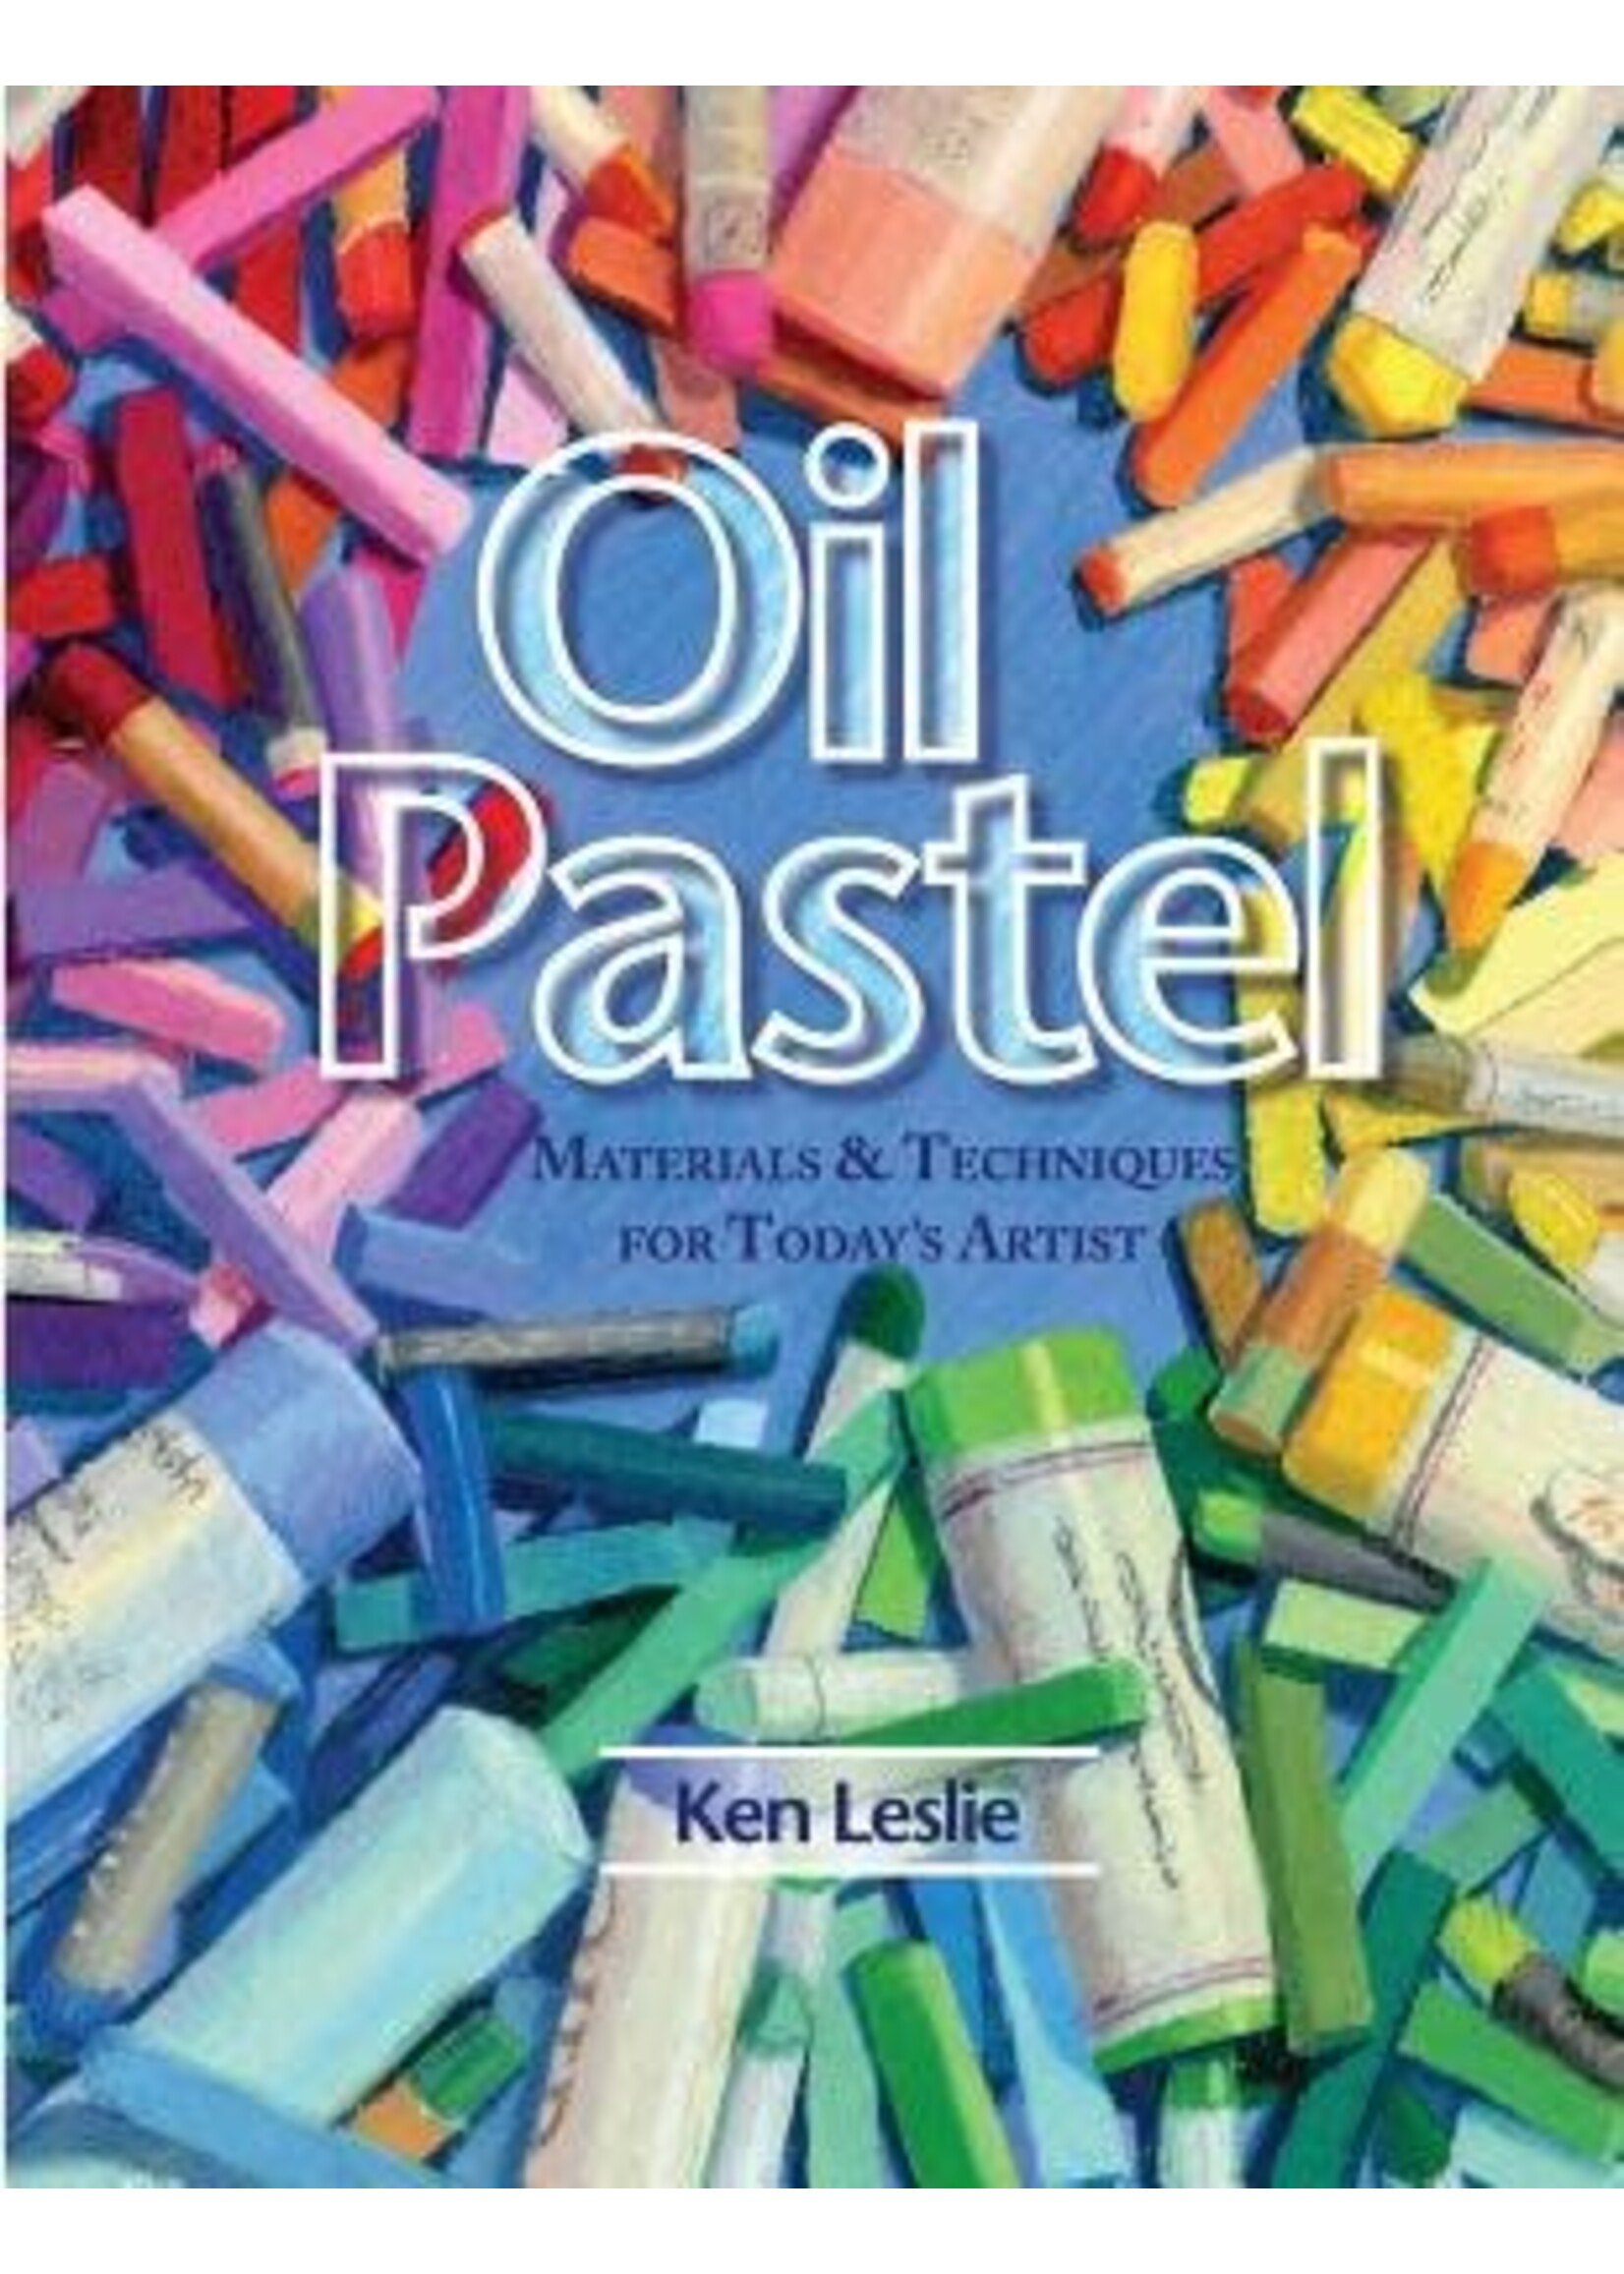 Oil Pastel: Materials and Techniques for Today's Artist by Kenneth D. Leslie